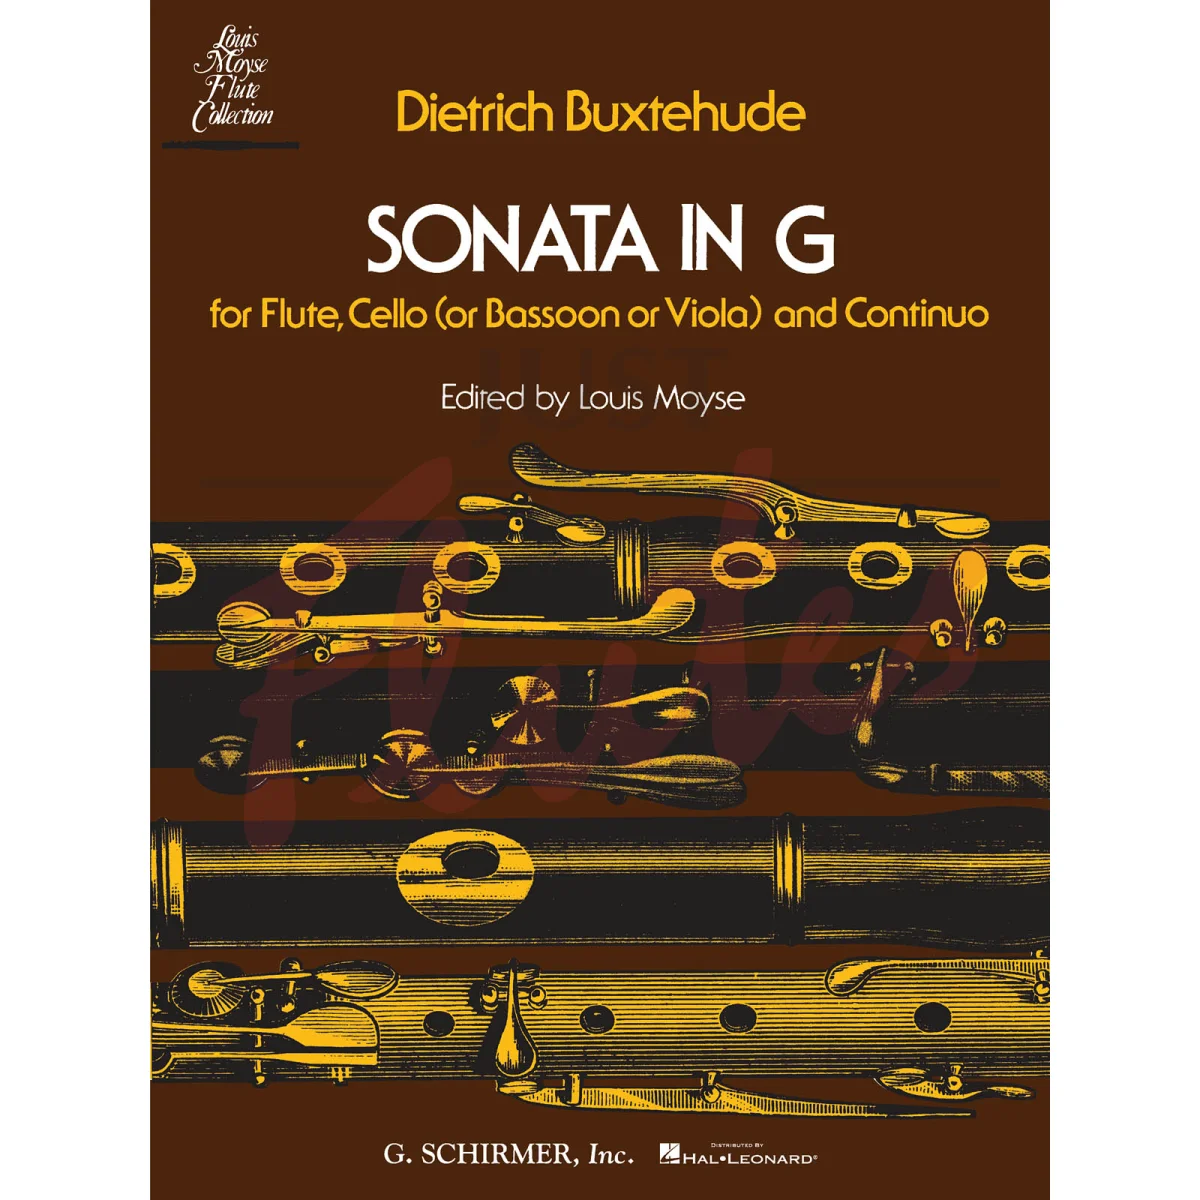 Sonata in G for Flute, Cello (or Bassoon or Viola) and Continuo